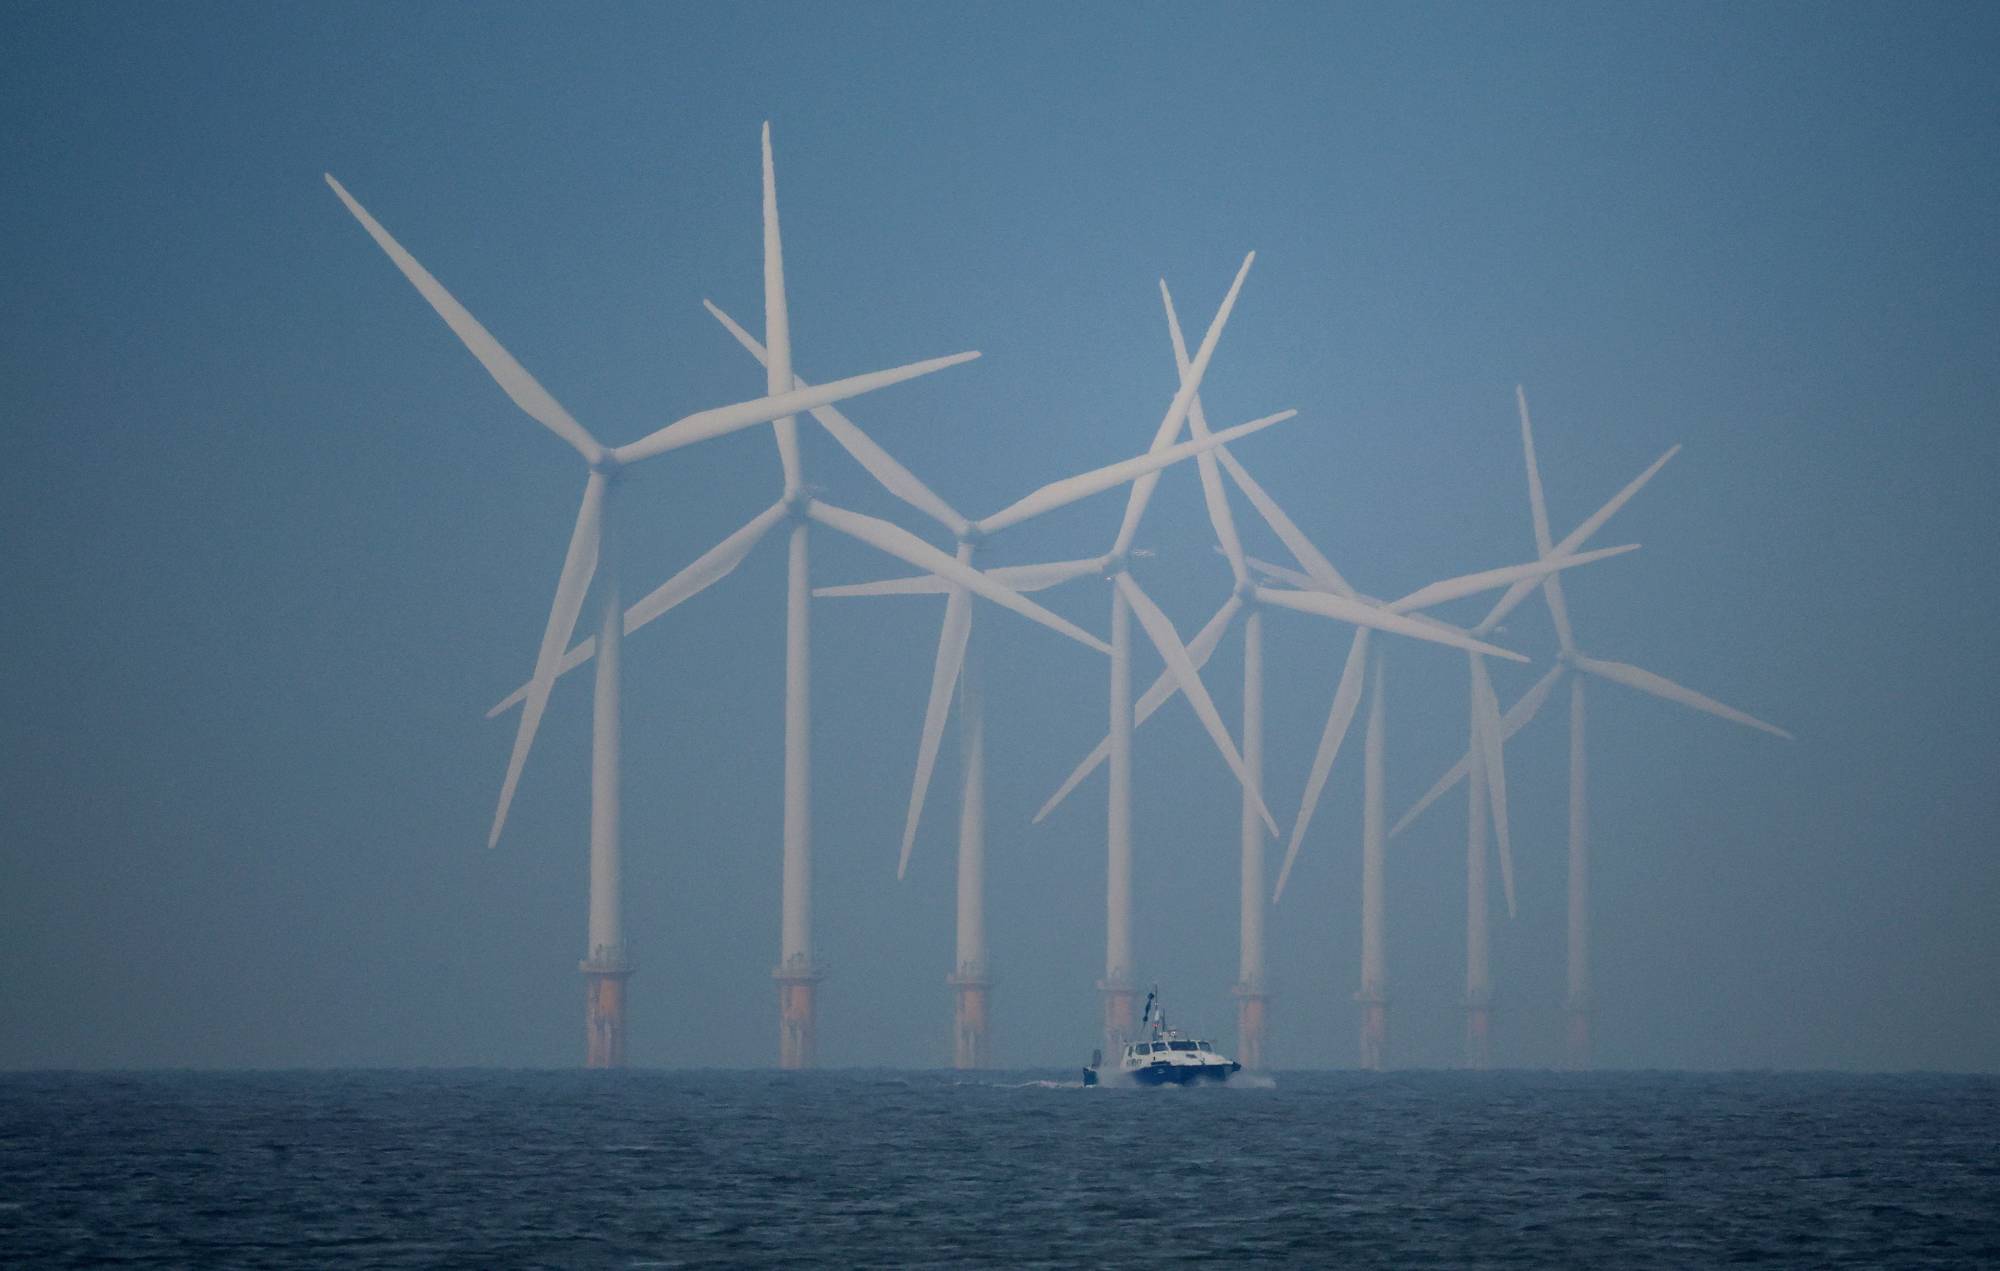 World's biggest wind power projects are in crisis just when world